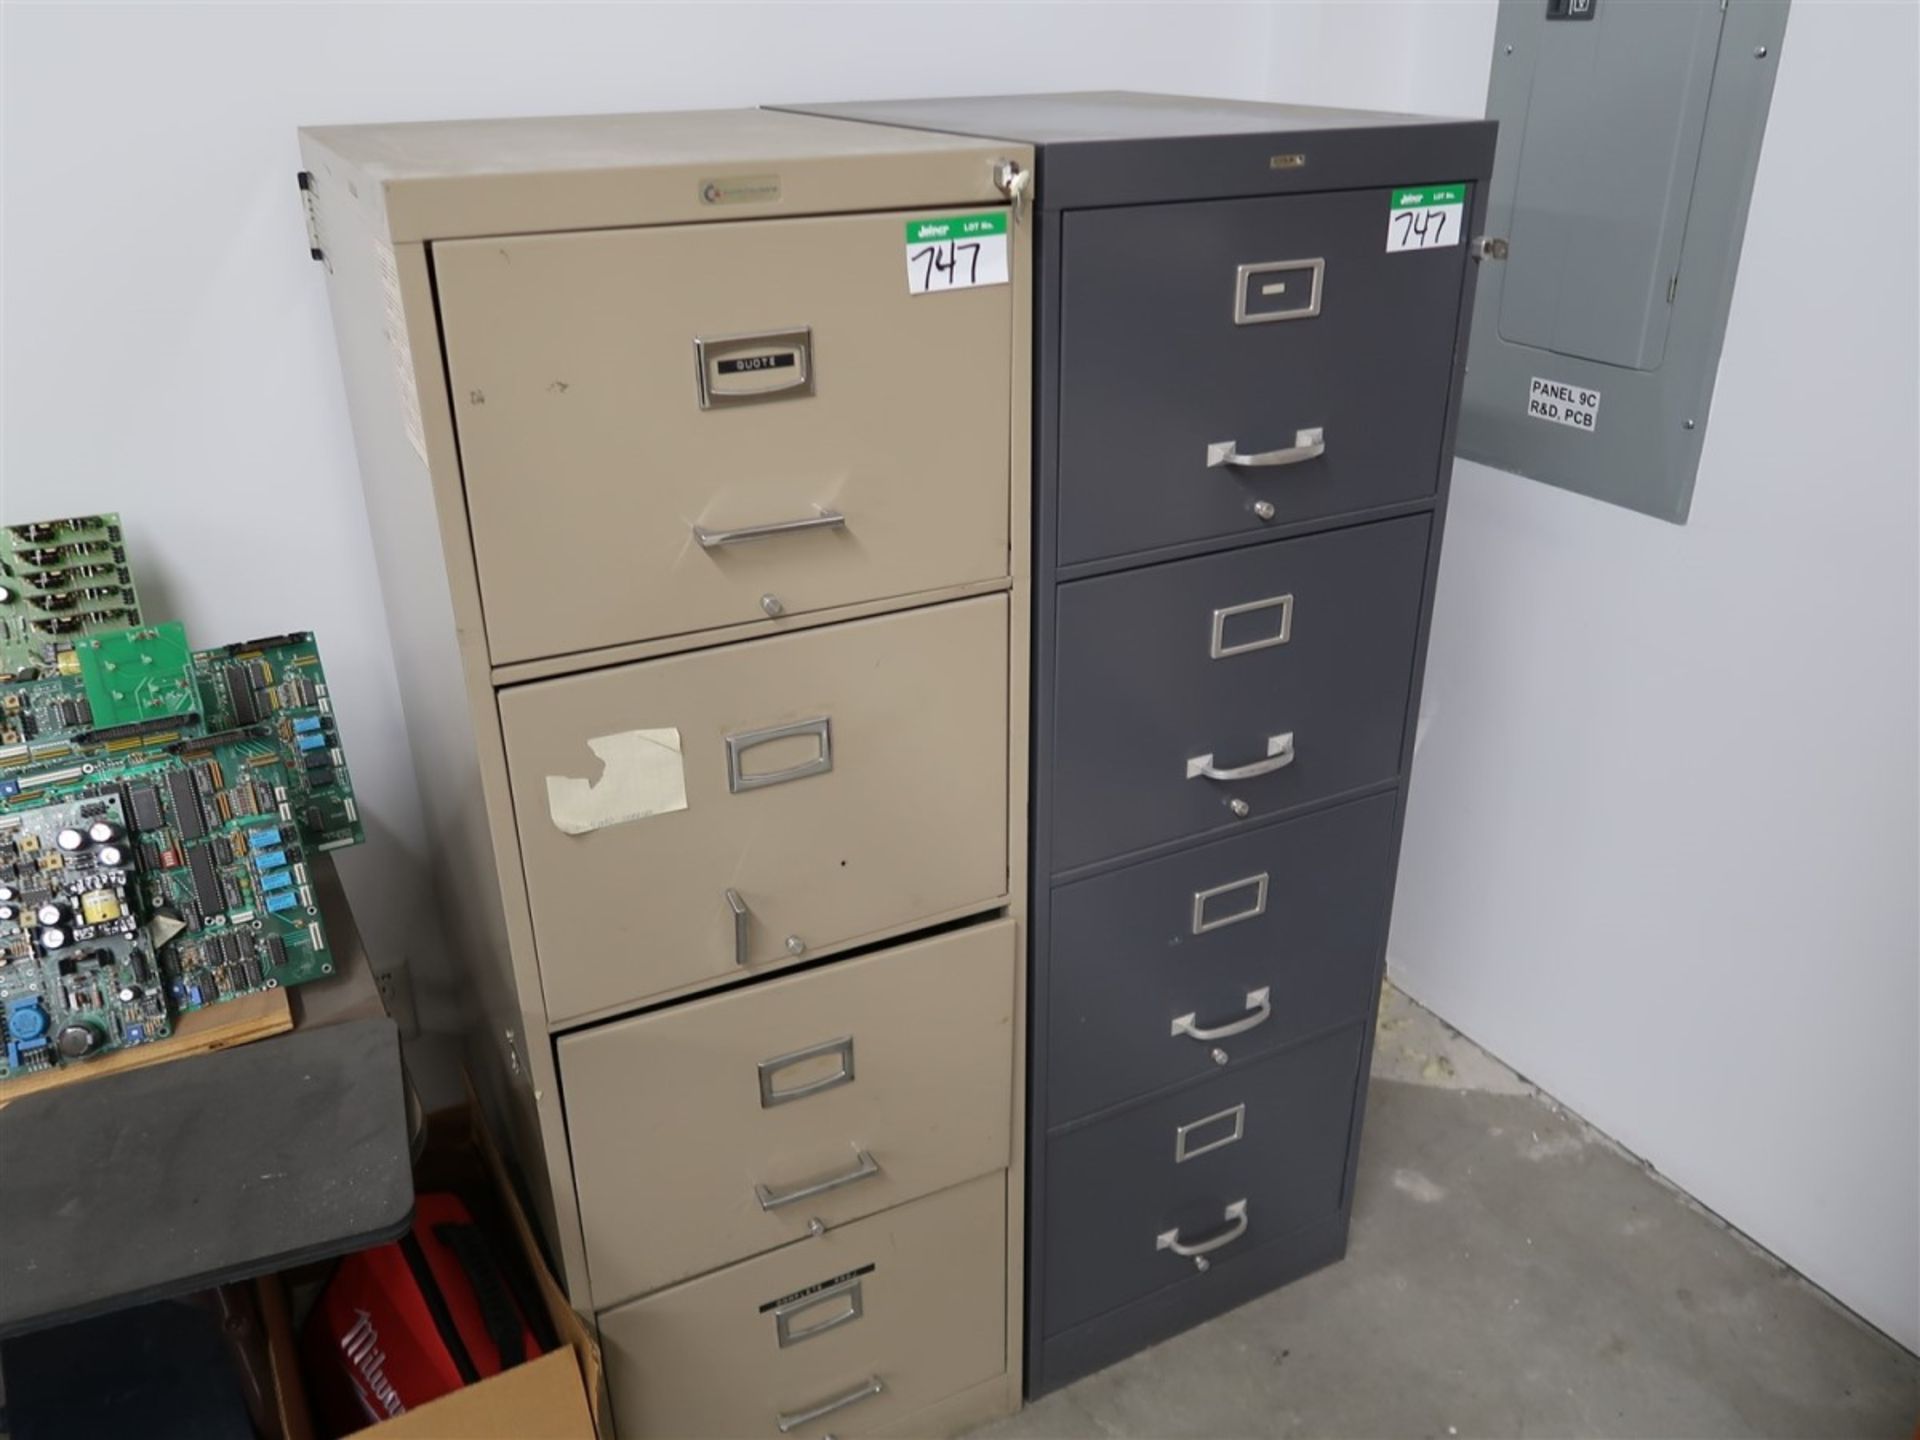 2 - LEGAL 4 DRAWER UPRIGHT FILE CABINETS